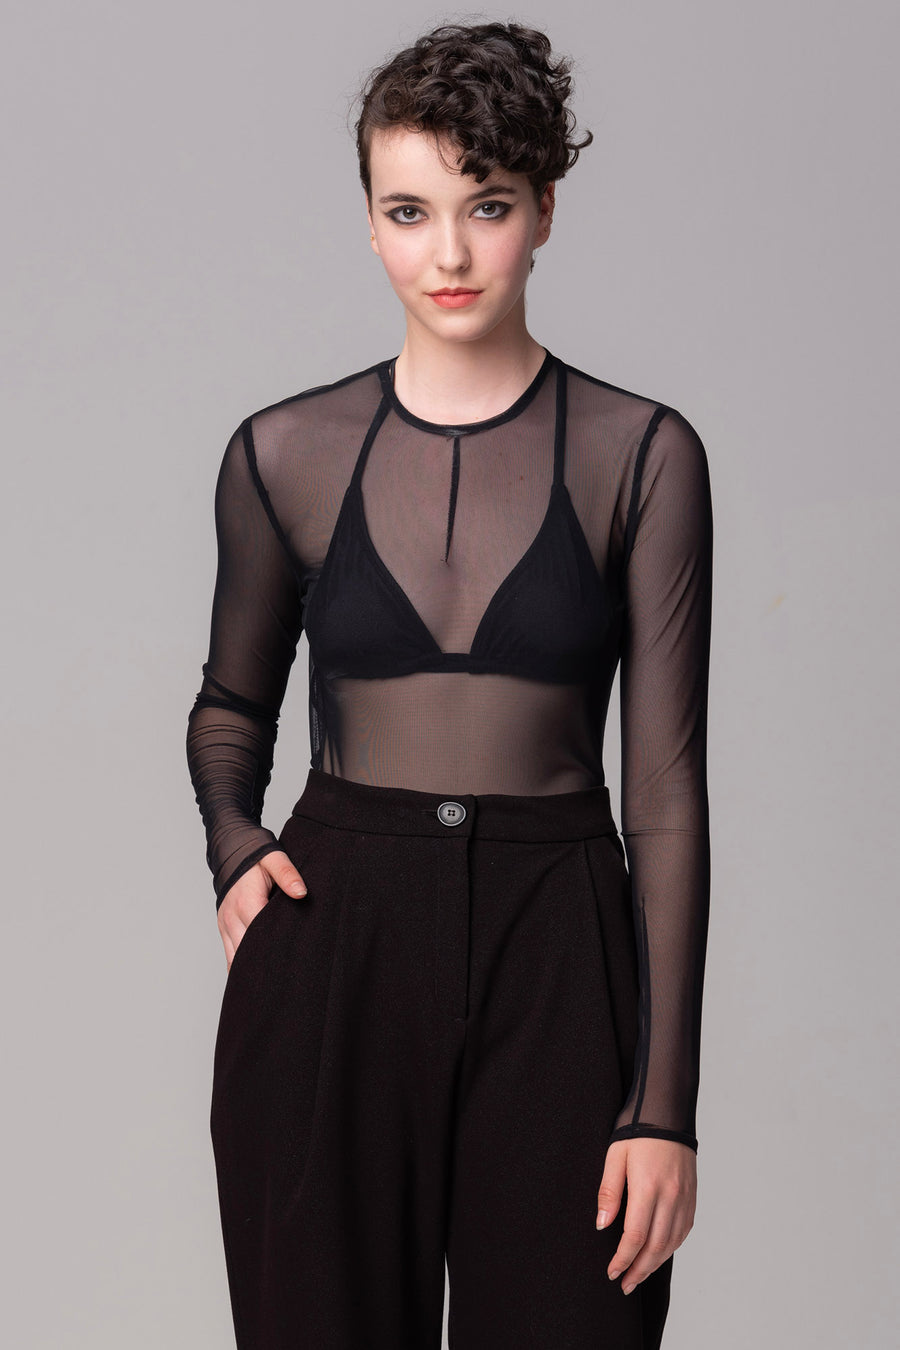 Halo Recycled Polyester Mesh Top – ValerieDumaine